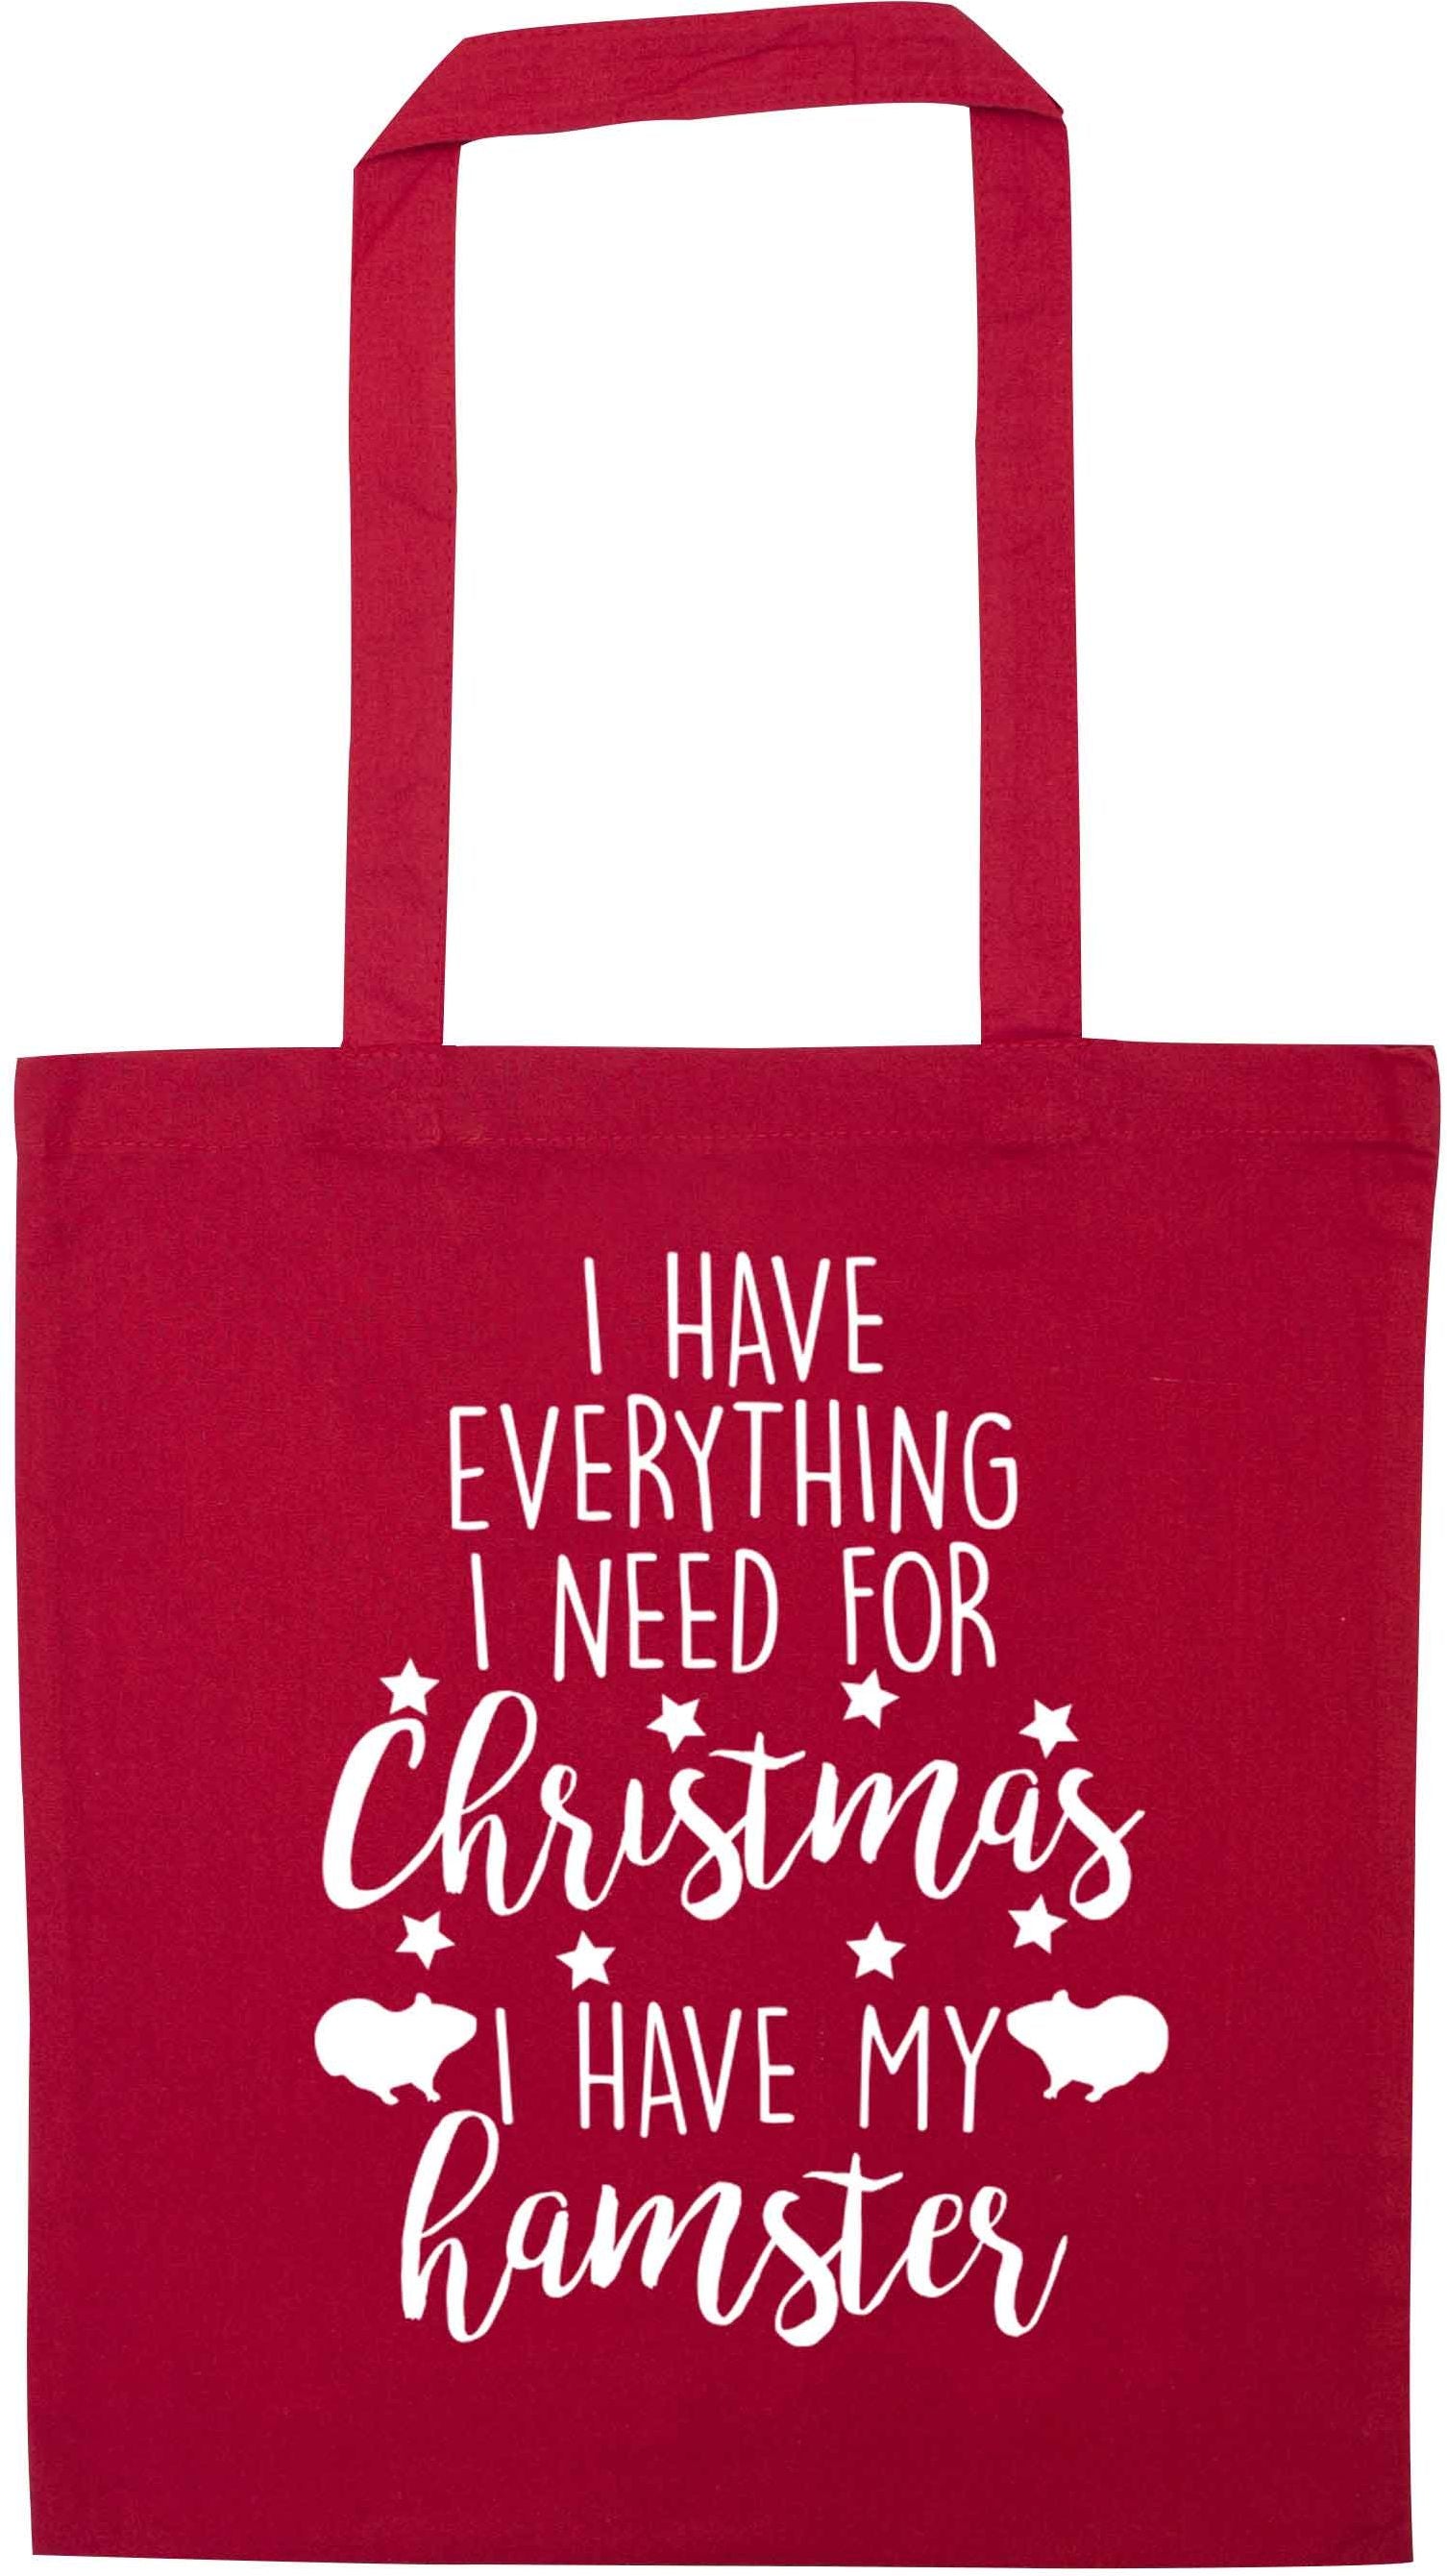 I have everything I need for Christmas I have my hamster red tote bag